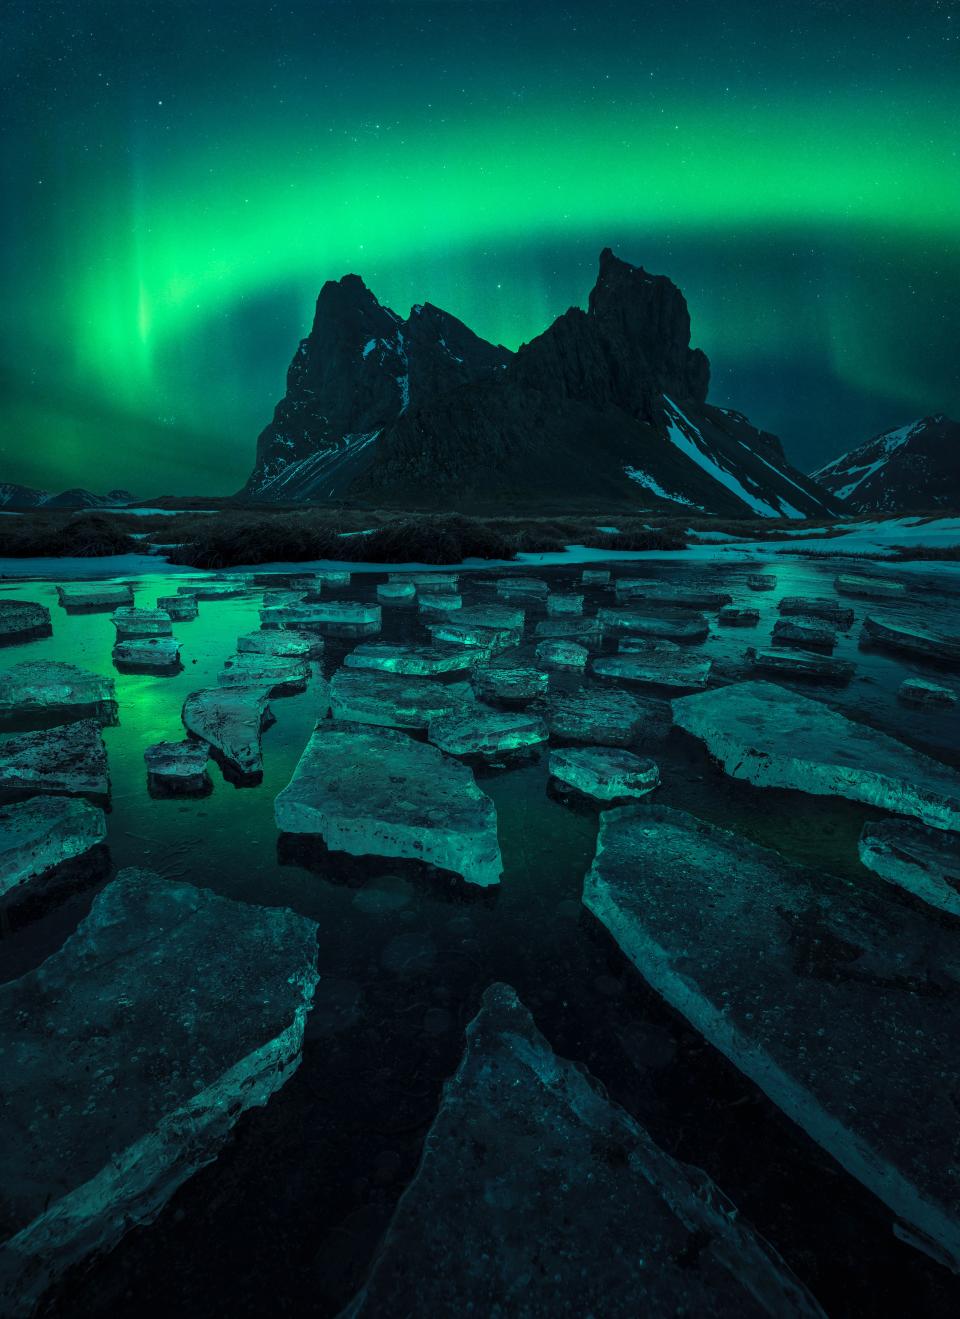 auroras above jagged landscape bathed in green